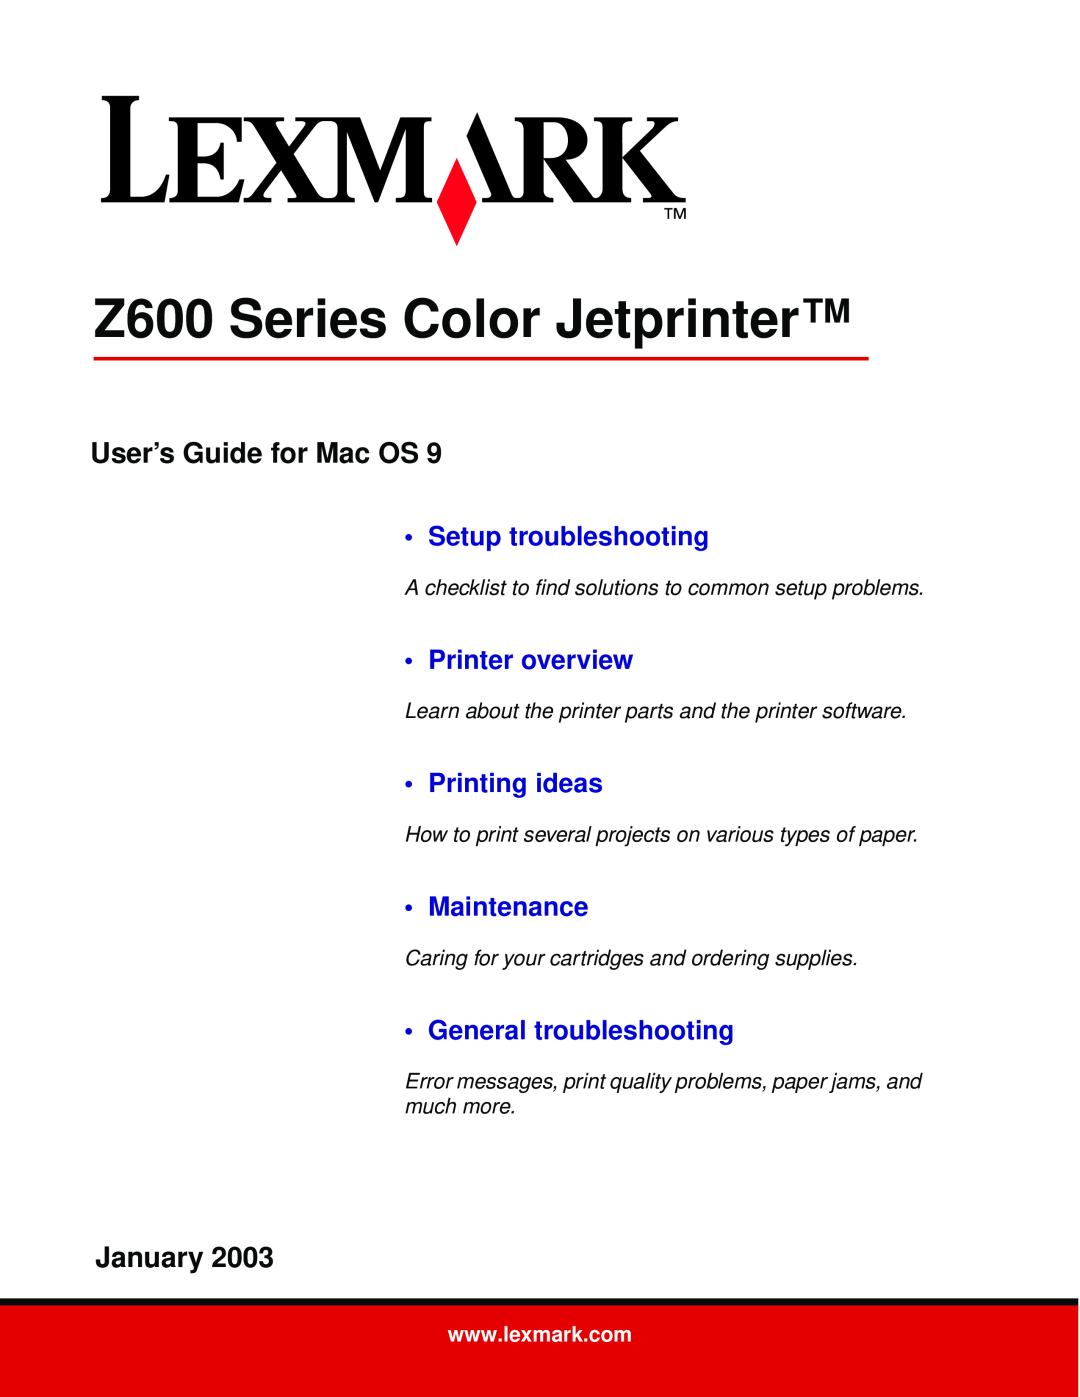 Lexmark manual Z600 Series Color Jetprinter, User’s Guide for Mac OS, January, Setup troubleshooting, Printer overview 